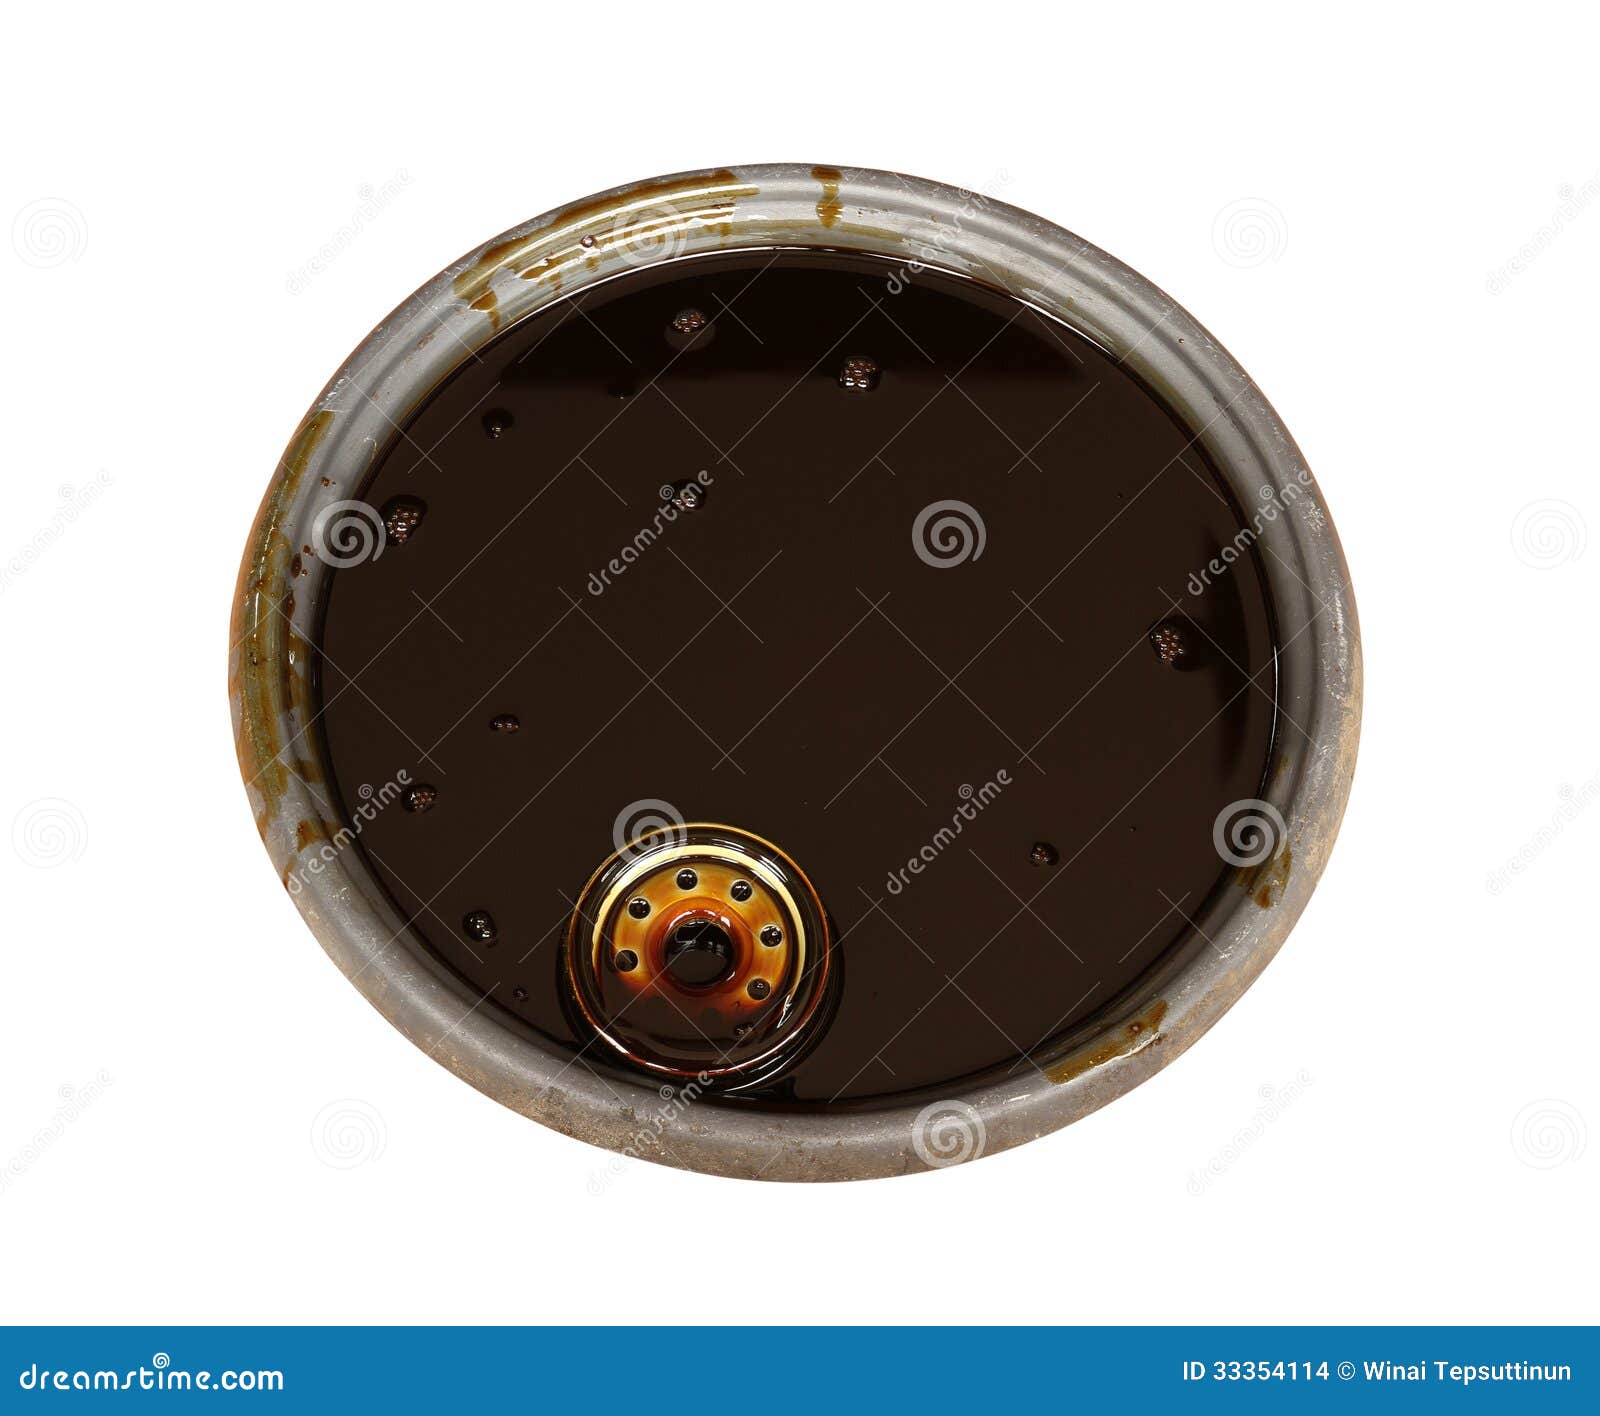 Used engine oil in basin (with clipping path) isolated on white background